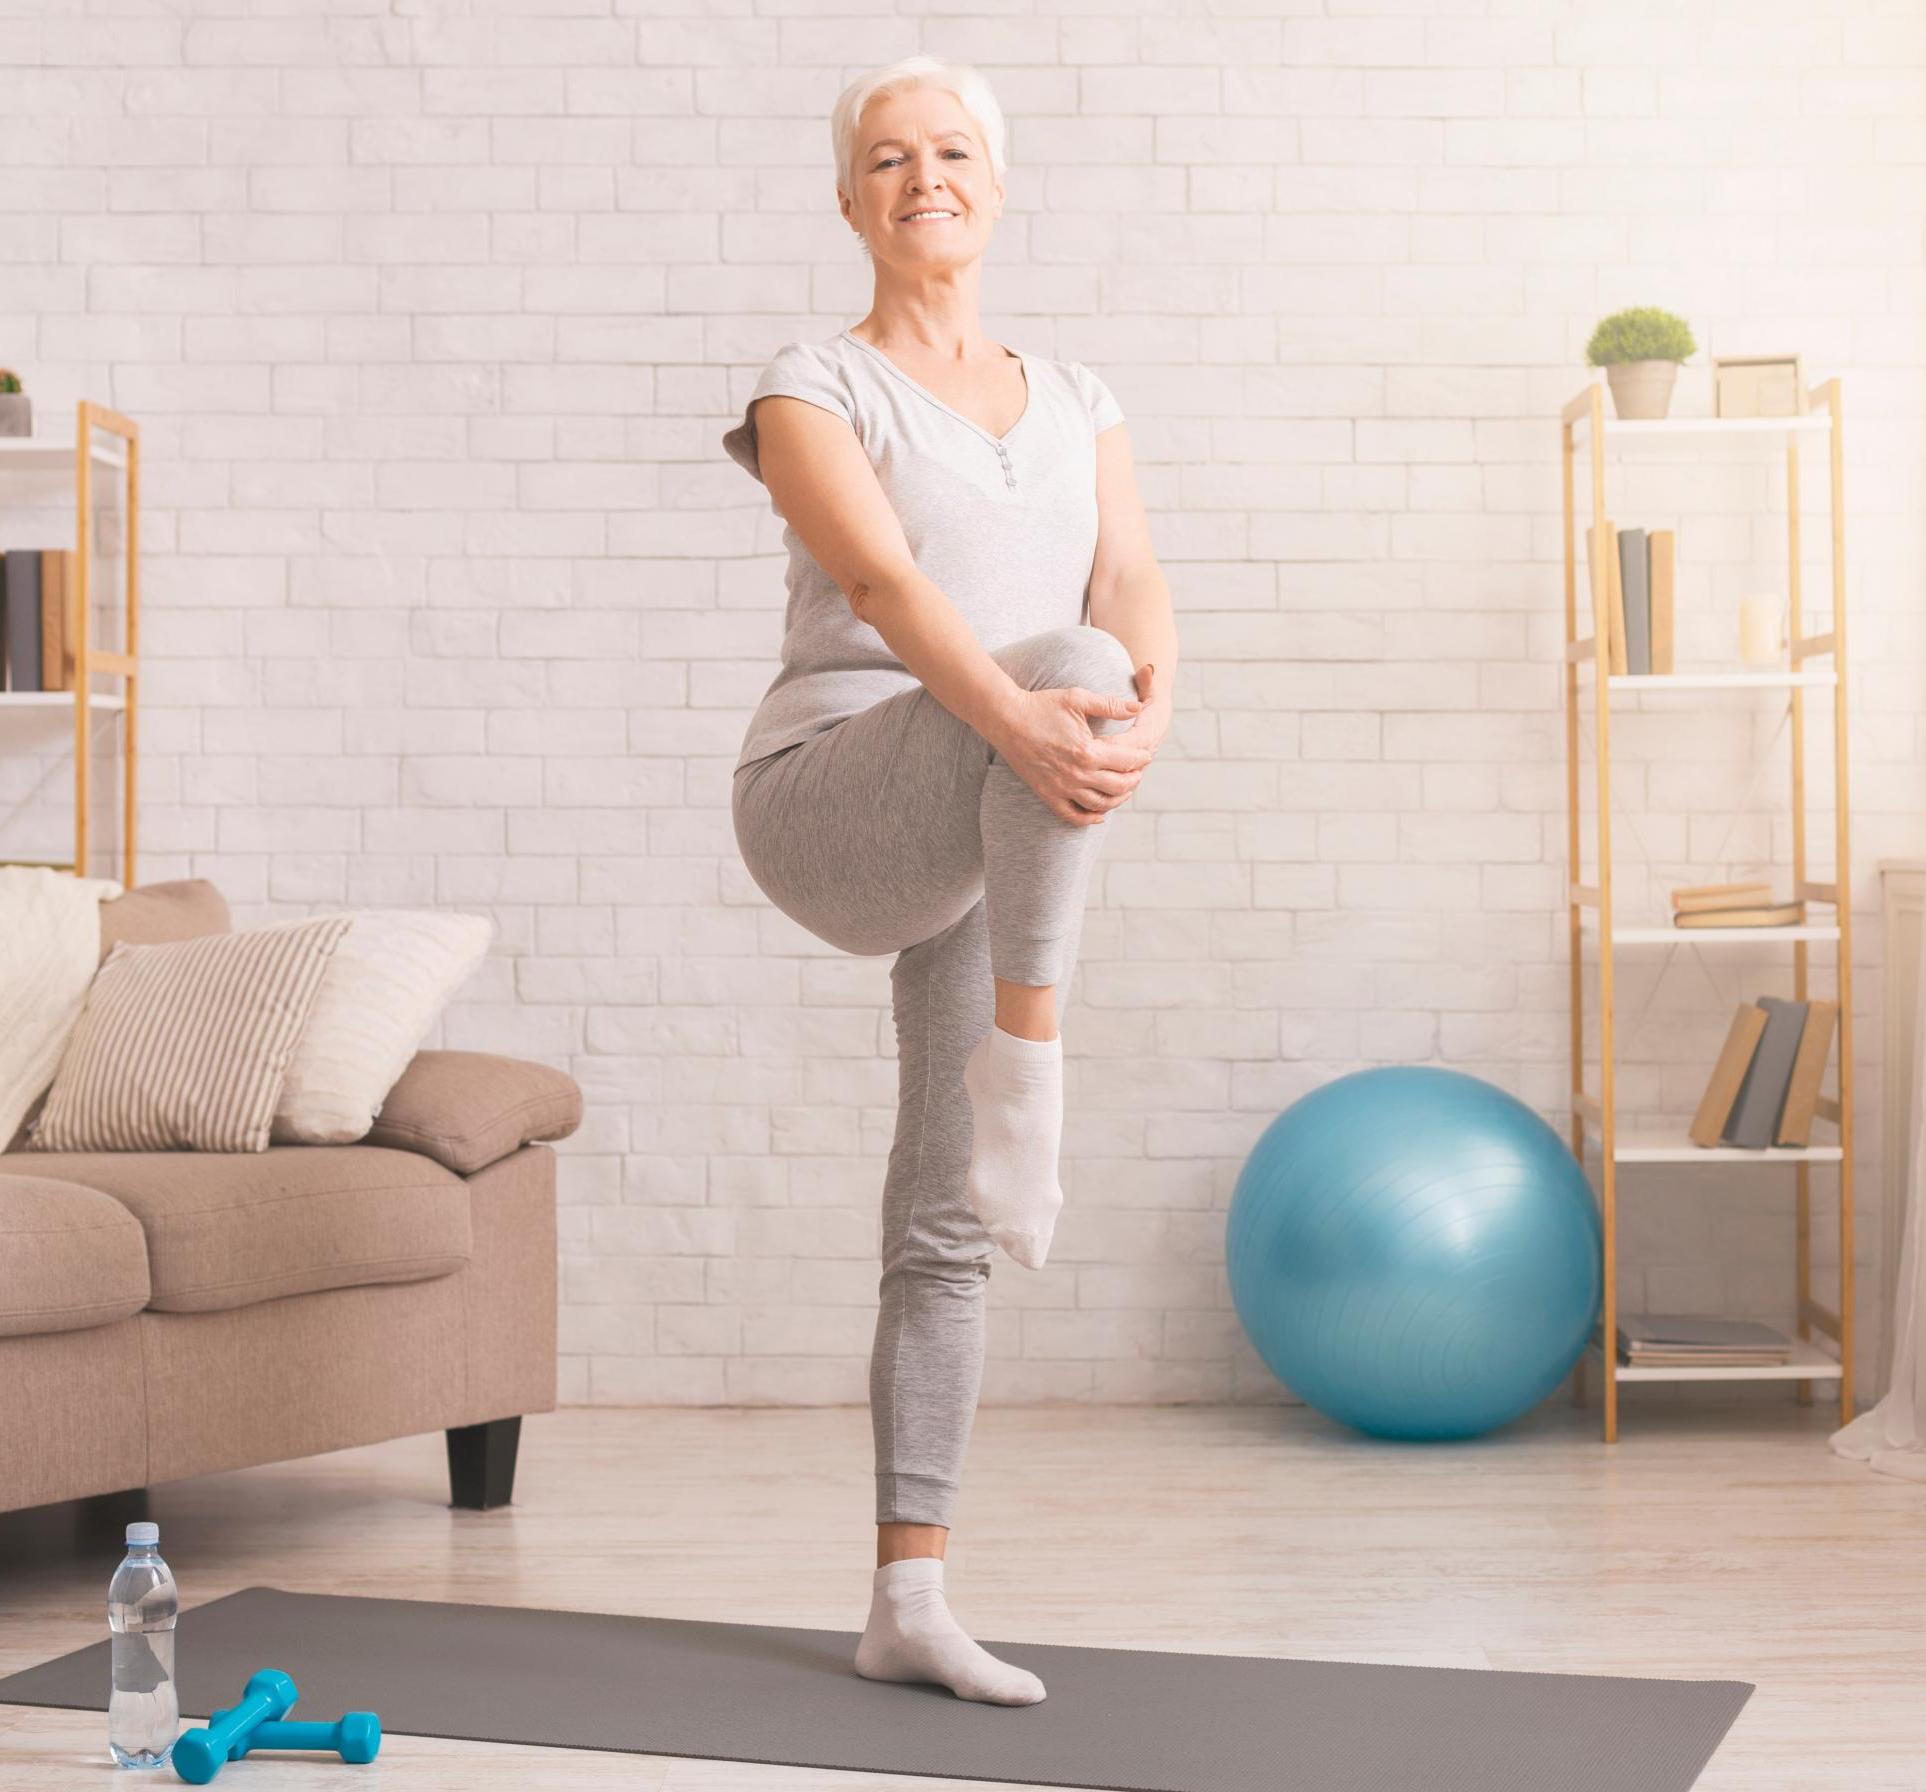 Healthy lifestyle. Active senior woman warming up at home, free space